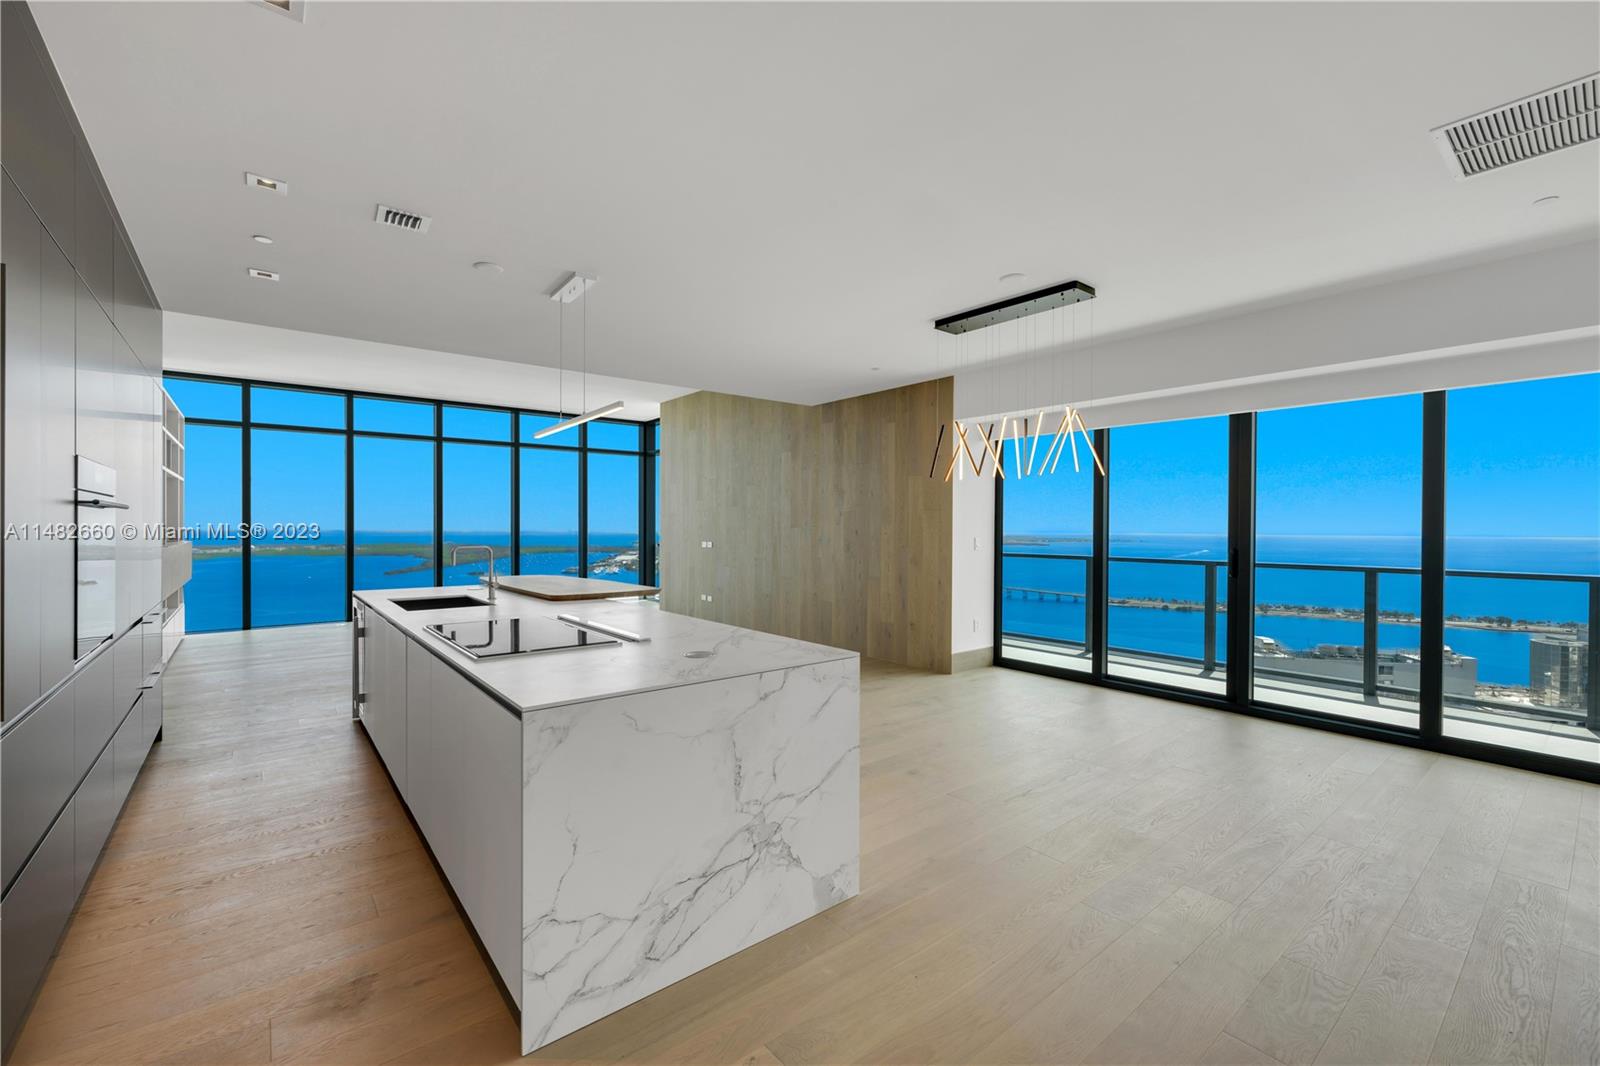 This is hands-down the most stunning apartment on Brickell. Be the first to live in this residence that has been completely gutted with brand new wood floors, Poggenpohl kitchen cabinetry, Sub Zero and Miele appliances and spa like bathrooms. Jaw dropping views of the Atlantic Ocean, Biscayne Bay, South Beach, Key Biscayne, south Brickell Av and all the way west to the MIA airport. Echo condominium is one of the newest luxury buildings in Brickell which offers 5-star resort style amenities that include an infinity pool, a bar with food & drinks, a fitness center, in-house chauffeur service, and 24/7 valet service. This unit come with 3 PARKING spots.